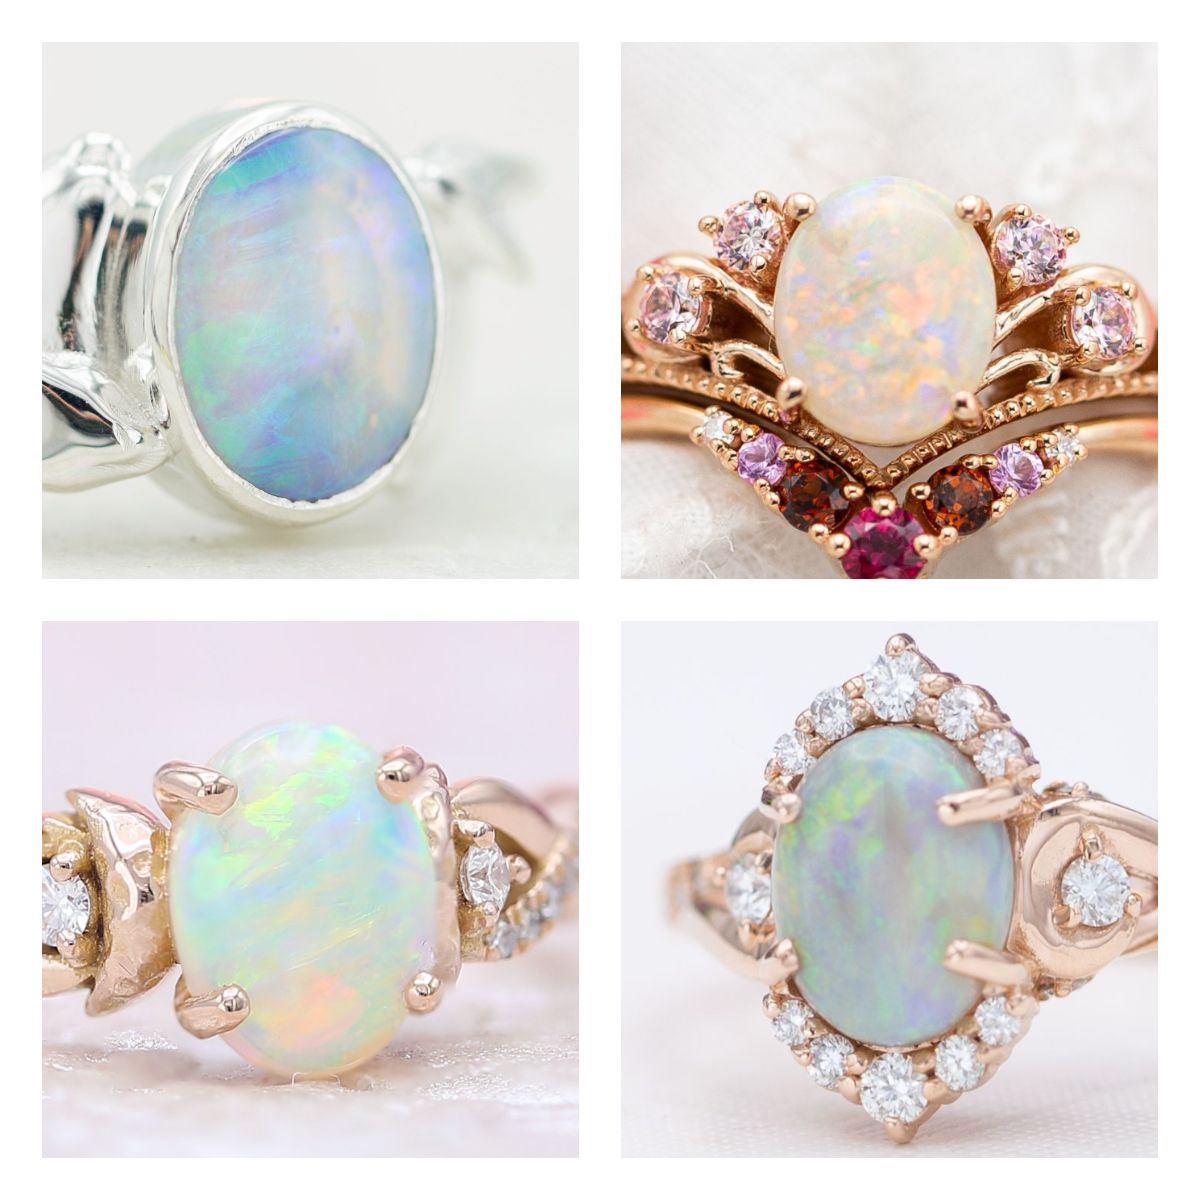 How to pick the perfect opal | CustomMade.com